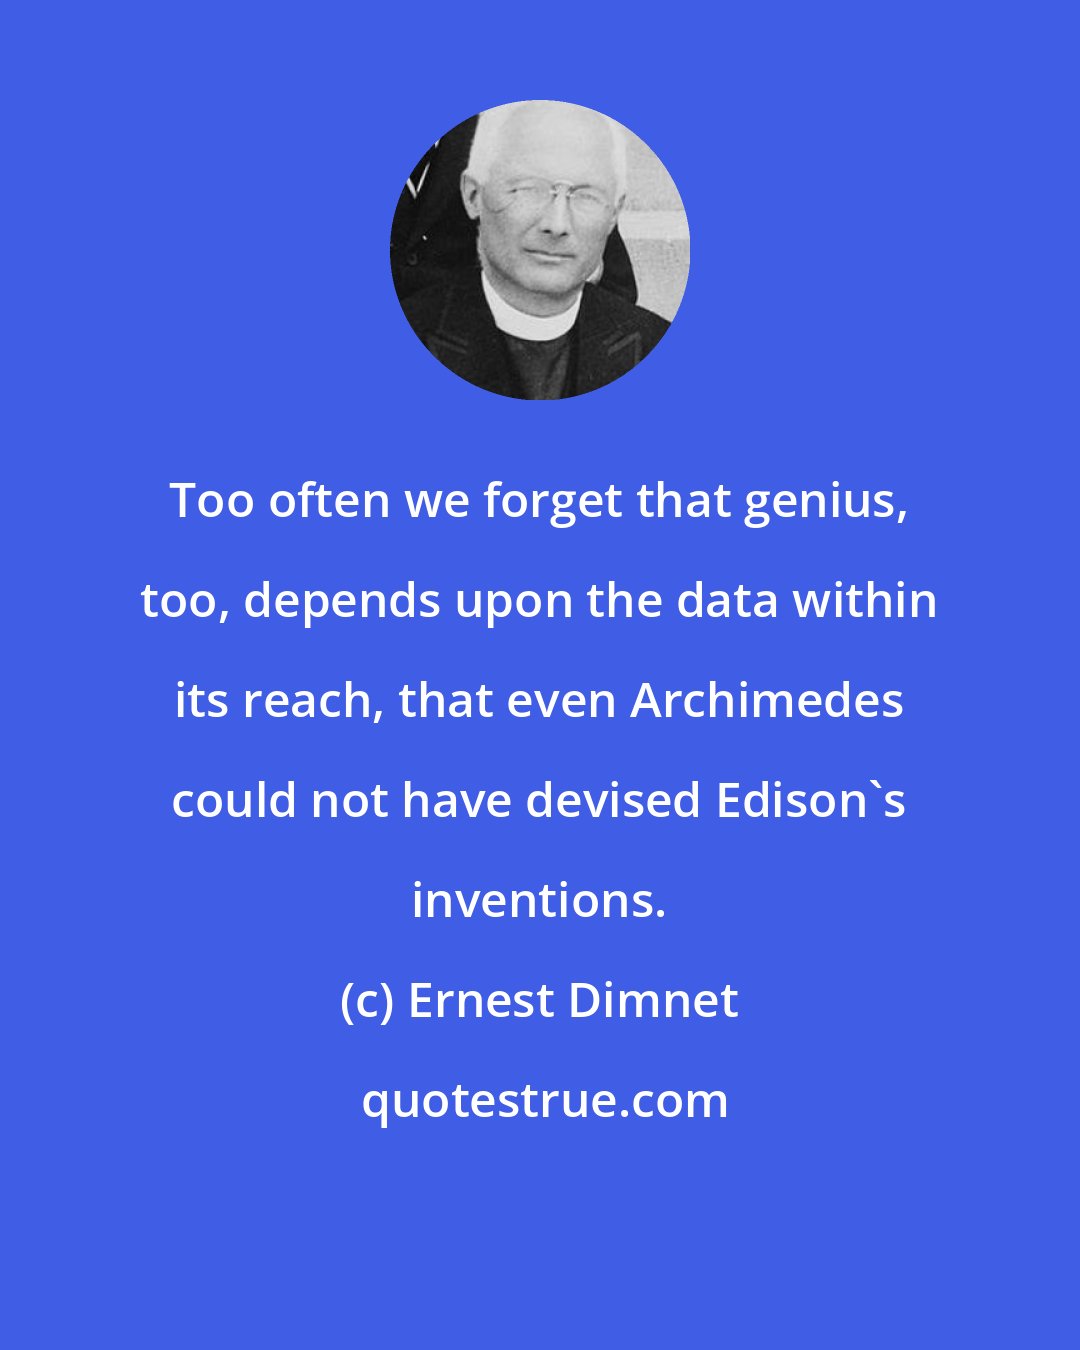 Ernest Dimnet: Too often we forget that genius, too, depends upon the data within its reach, that even Archimedes could not have devised Edison's inventions.